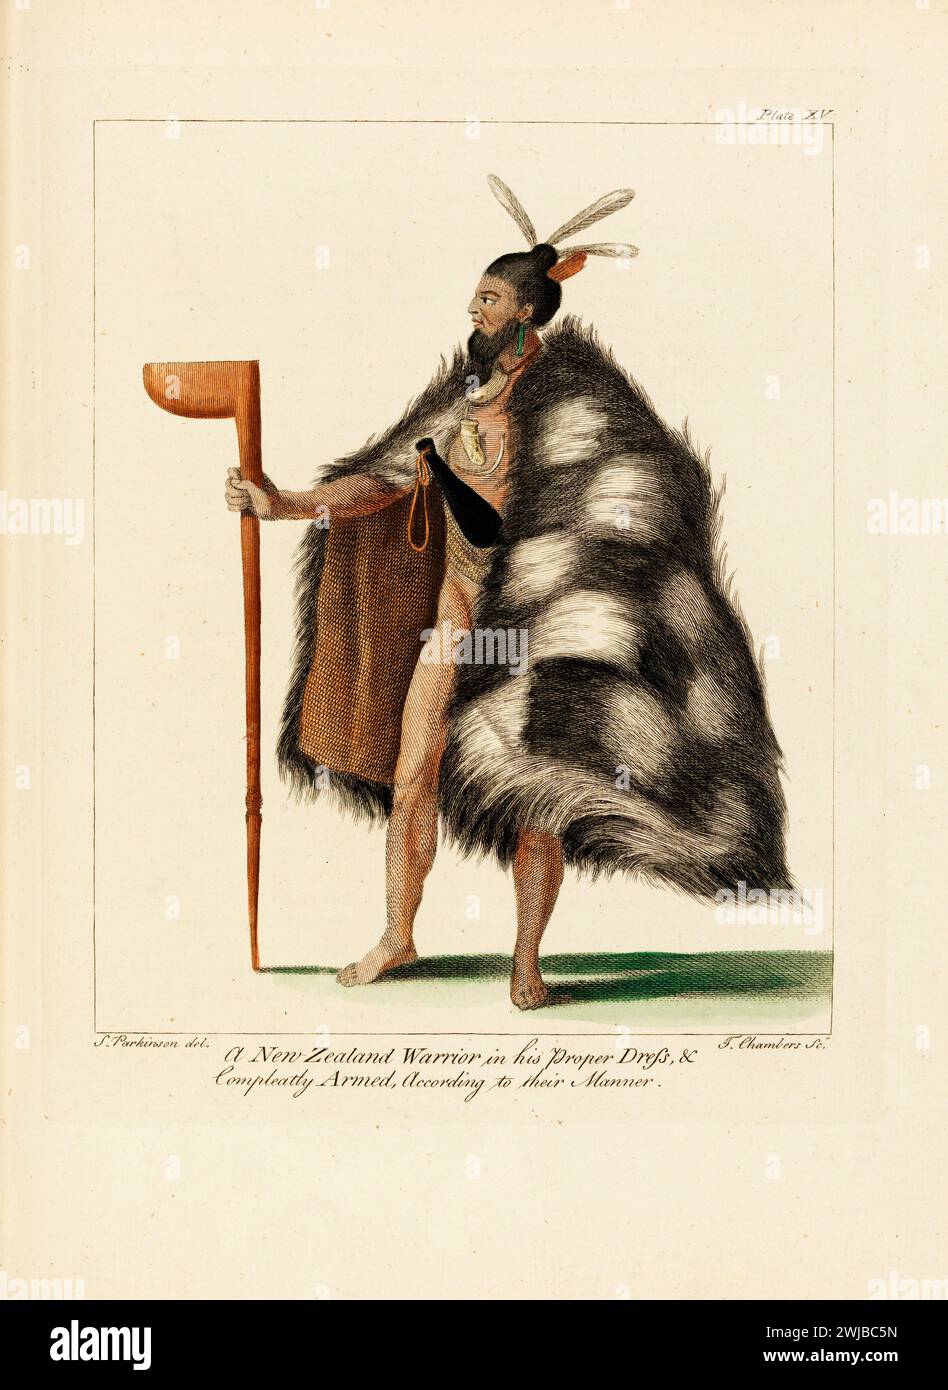 'A New Zealand warrior in his proper dress, & completely armed, according to their manner' Engraving From “A journal of a voyage to the South Seas : in His Majesty's ship, the Endeavour” from the papers of Sydney Parkinson, embellished with views and designs, delineated by the Author, and engraved by capital artists.  1773 Stock Photo